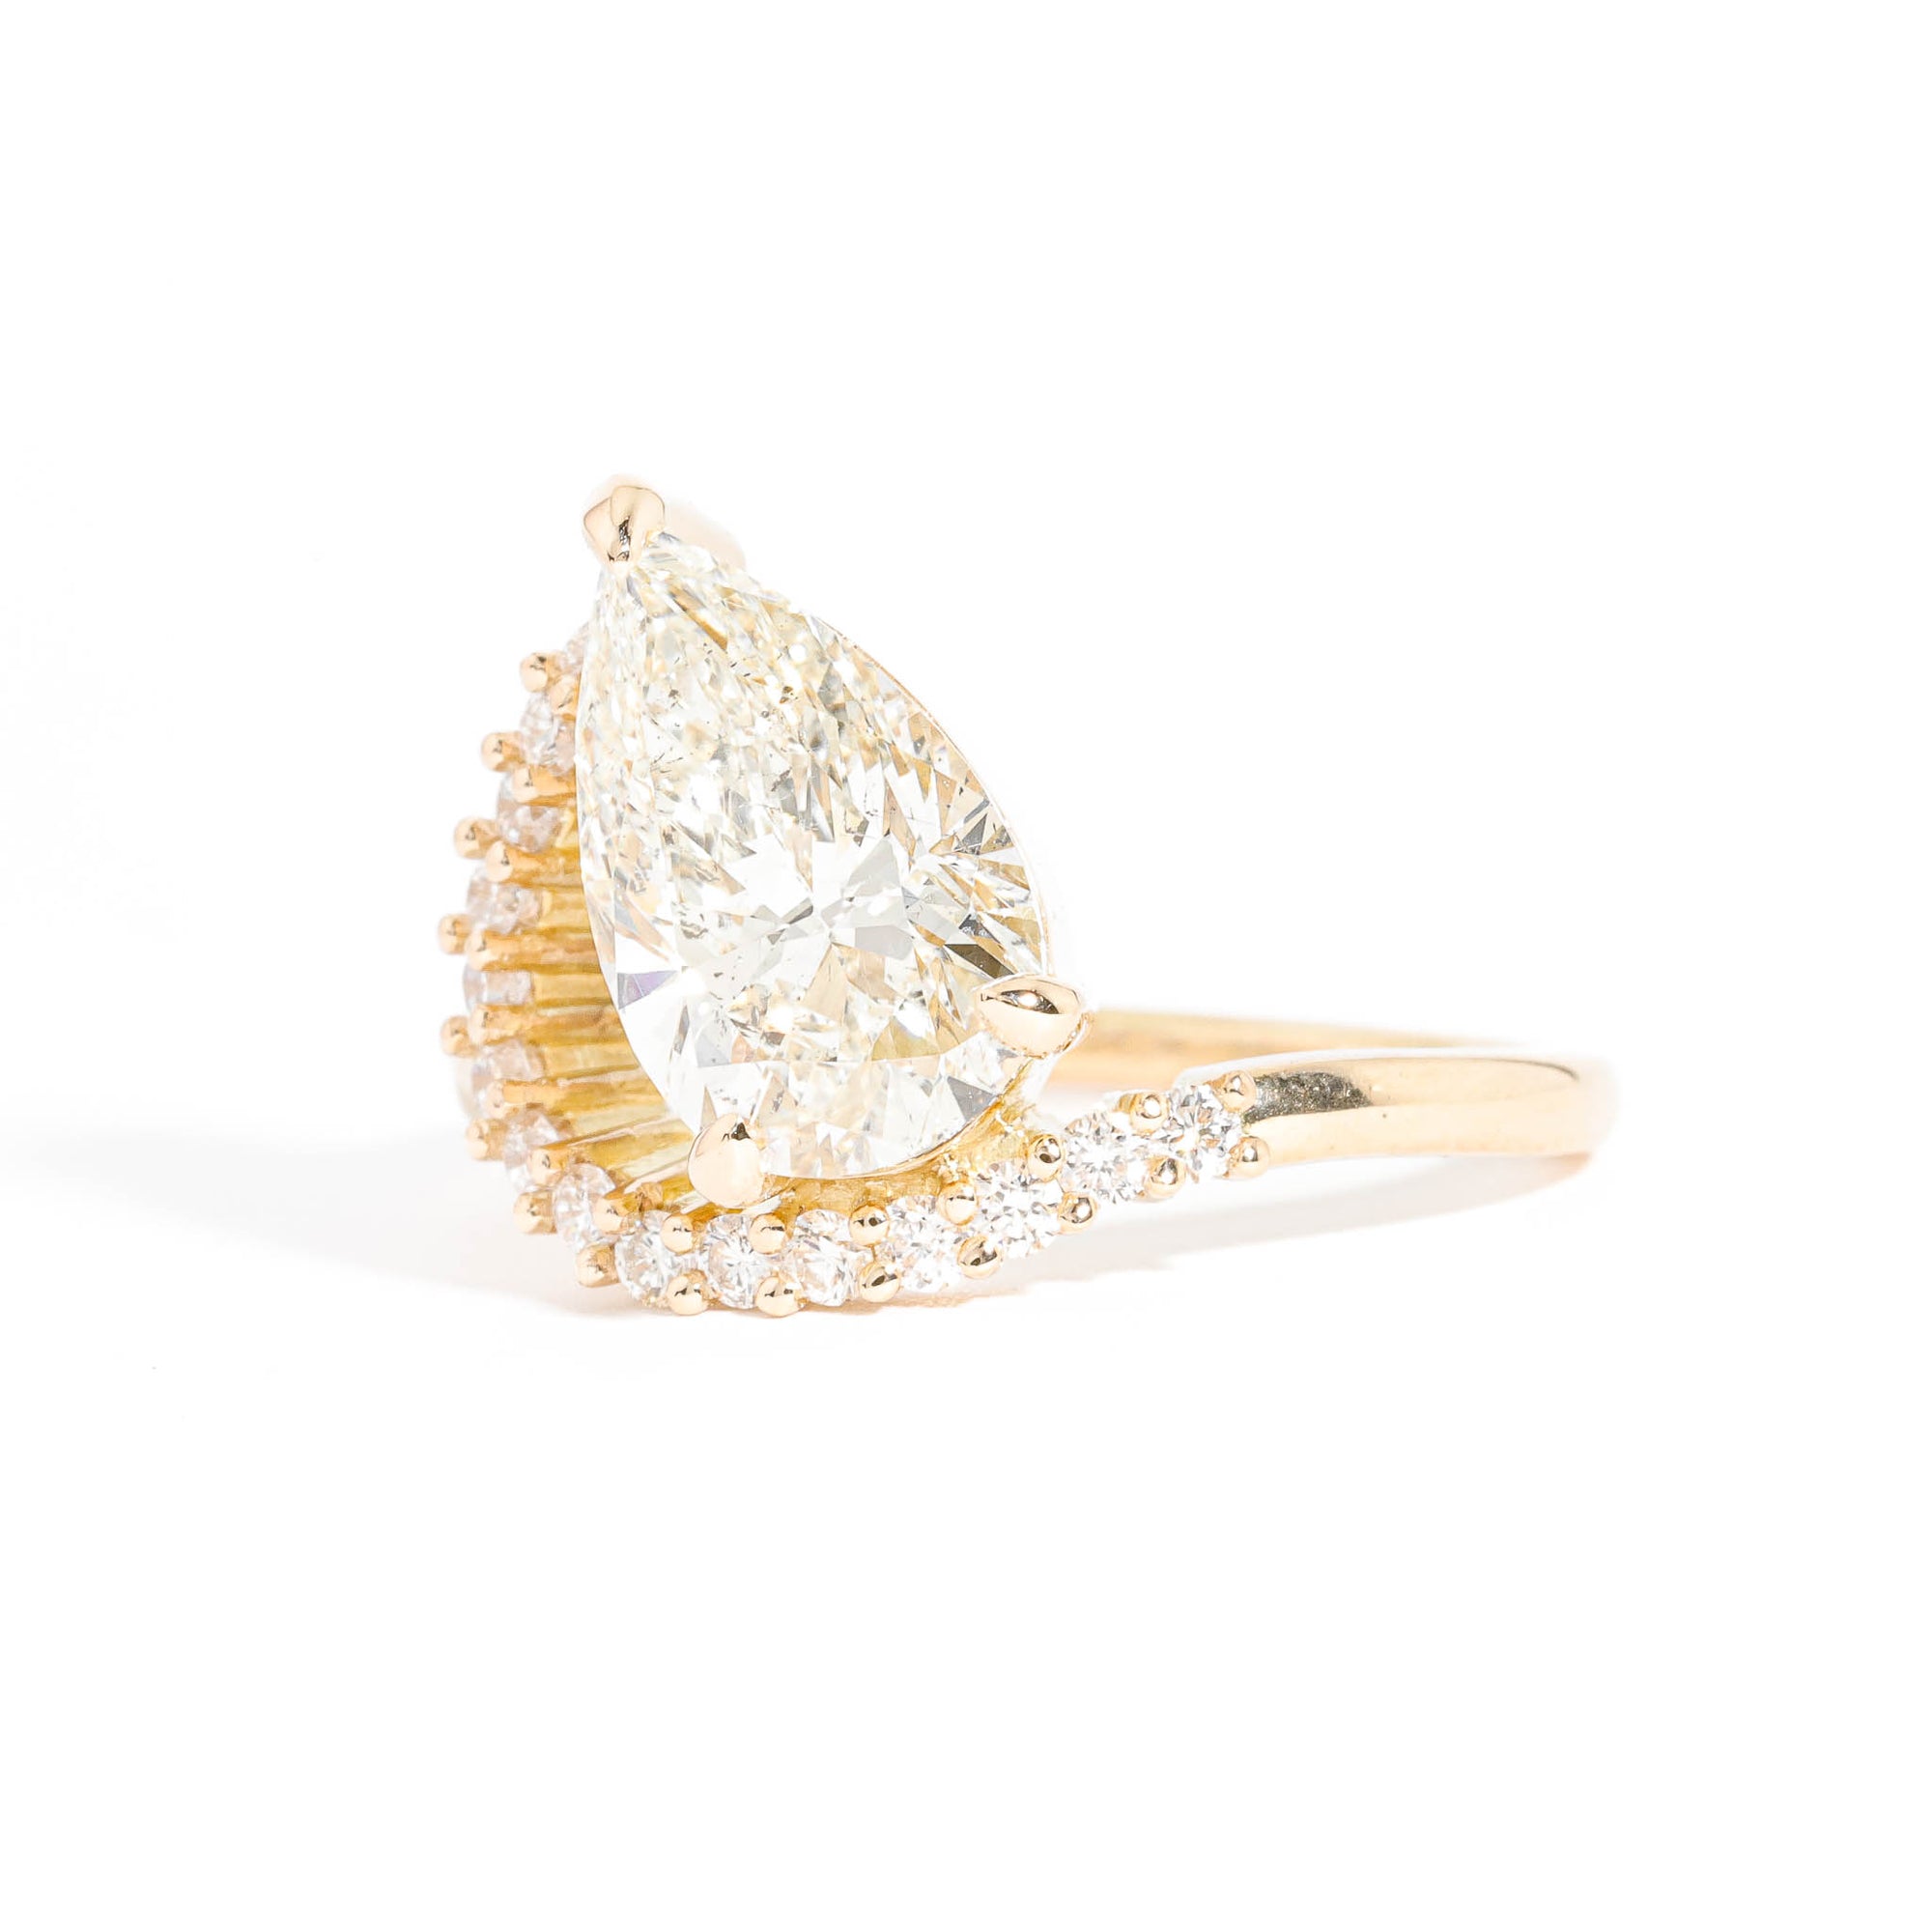 Pear Cut Diamond with an Arch of Thirteen Round Brilliant Cut Diamonds in 18 Carat Yellow Gold